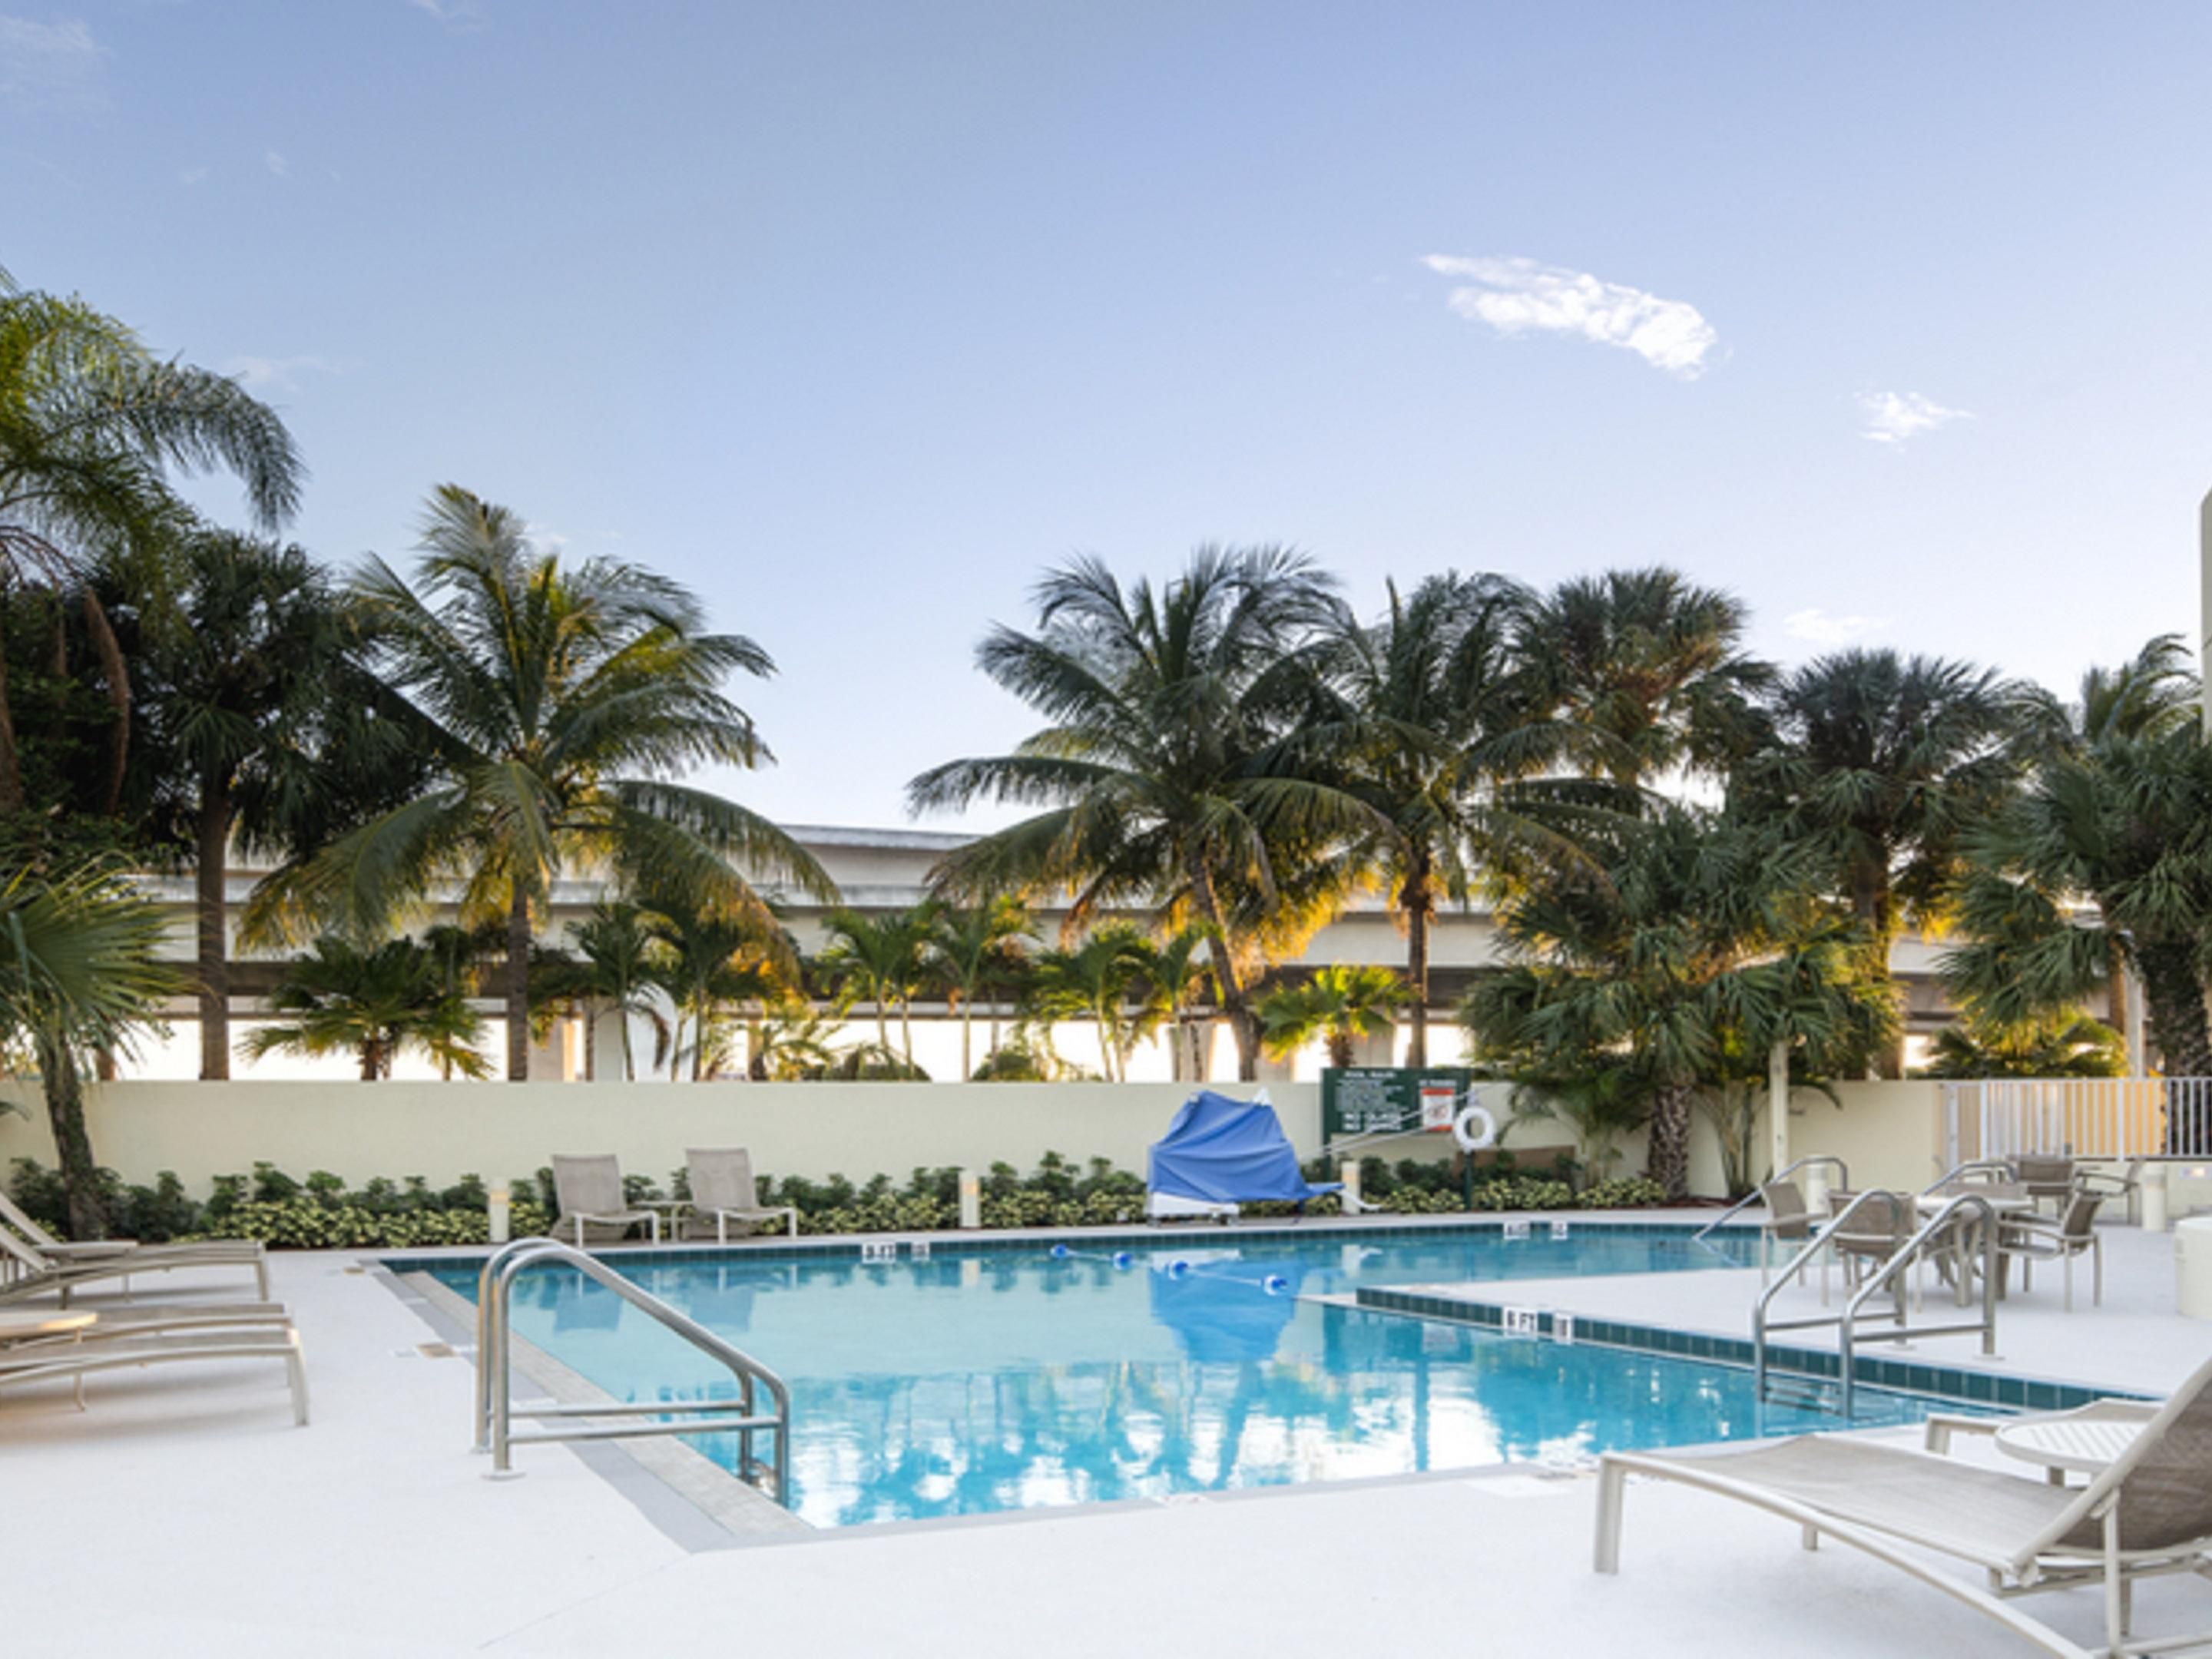 There’s no better place to be than poolside. Relax by our outdoor pool and soak up the West Palm Beach sun. Swim and cool off after a day of sightseeing or meetings. Enjoy some family time, put on your headphones, and relax with music and a refreshing drink from our restaurant.